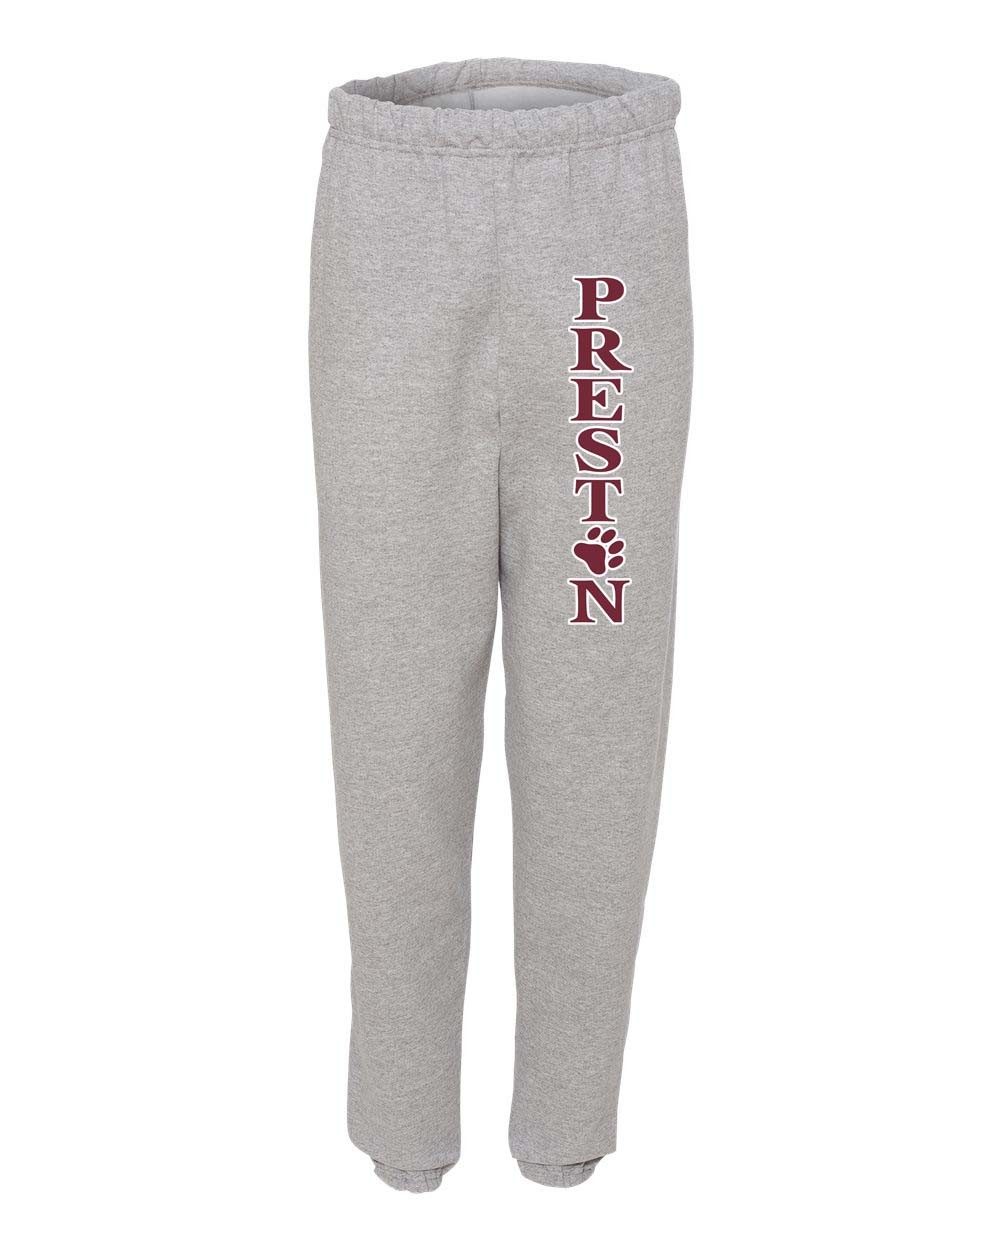 PHS Spirit Sweatpants w/ Paw Logo - Please Allow 2-3 Weeks for Delivery